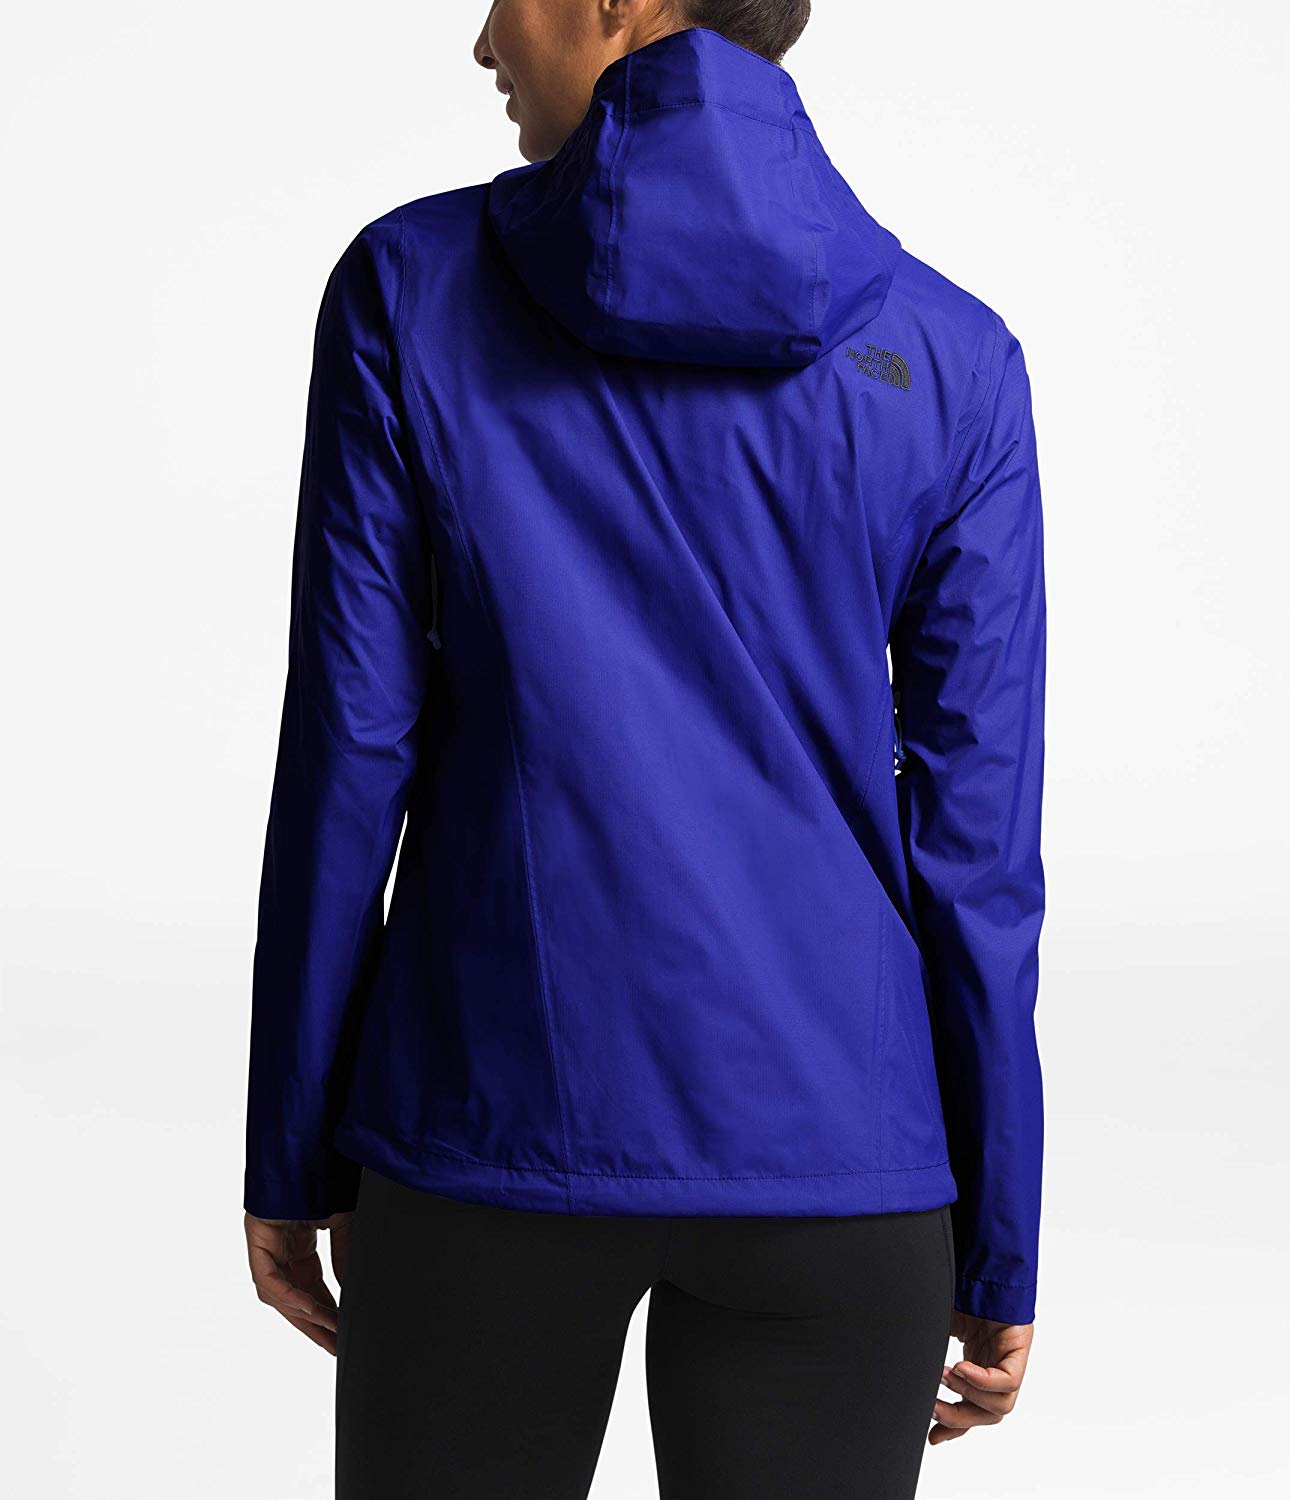 The North Face Women’s Venture 2 Jacket The North Face ktmart.vn 2